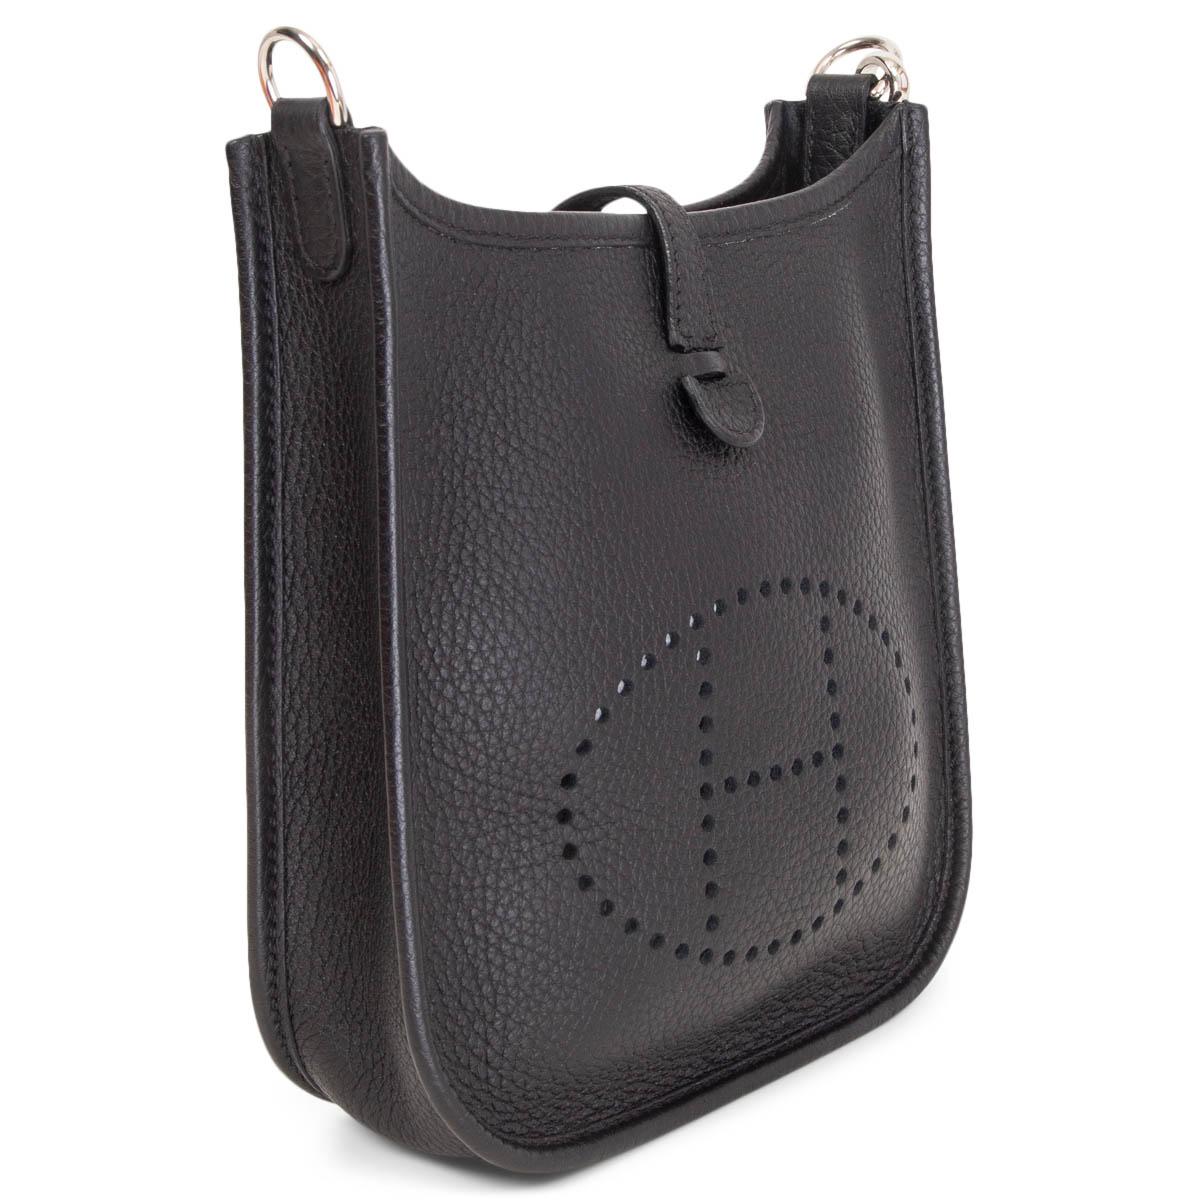 100% authentic Hermès Evelyne 16 Amazone crossbody bag in Noir (black) Taurillon Clemence leather with a black wool sangle strap, perforated leather 